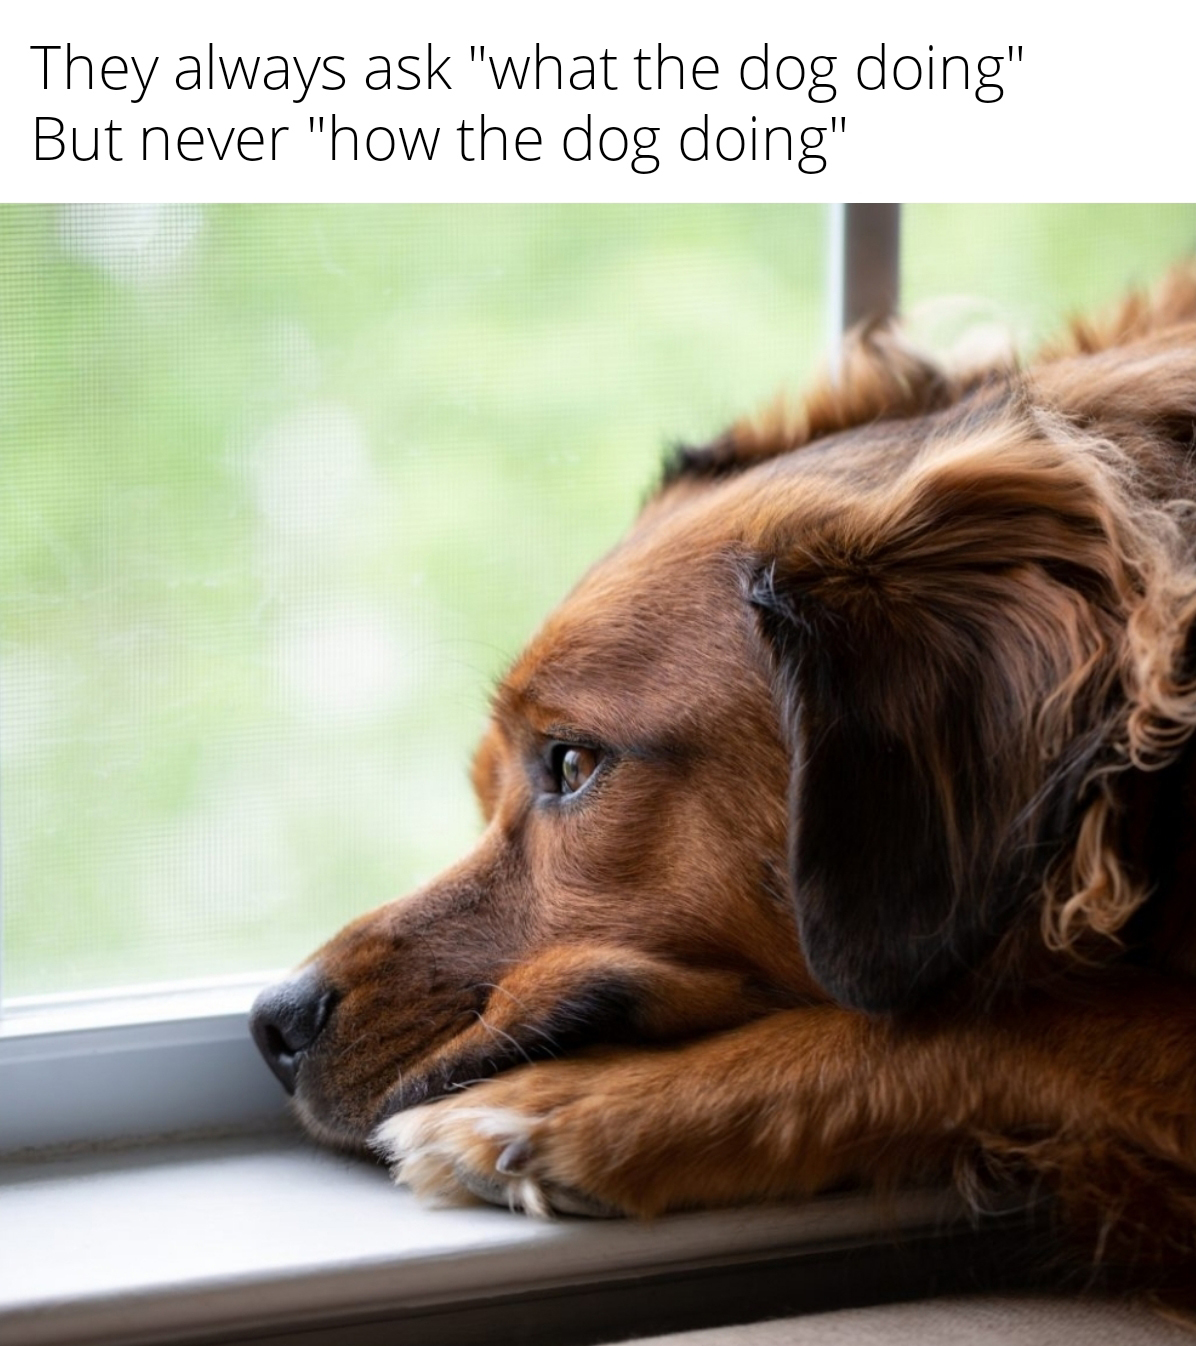 depressed dog - They always ask "what the dog doing" But never "how the dog doing"